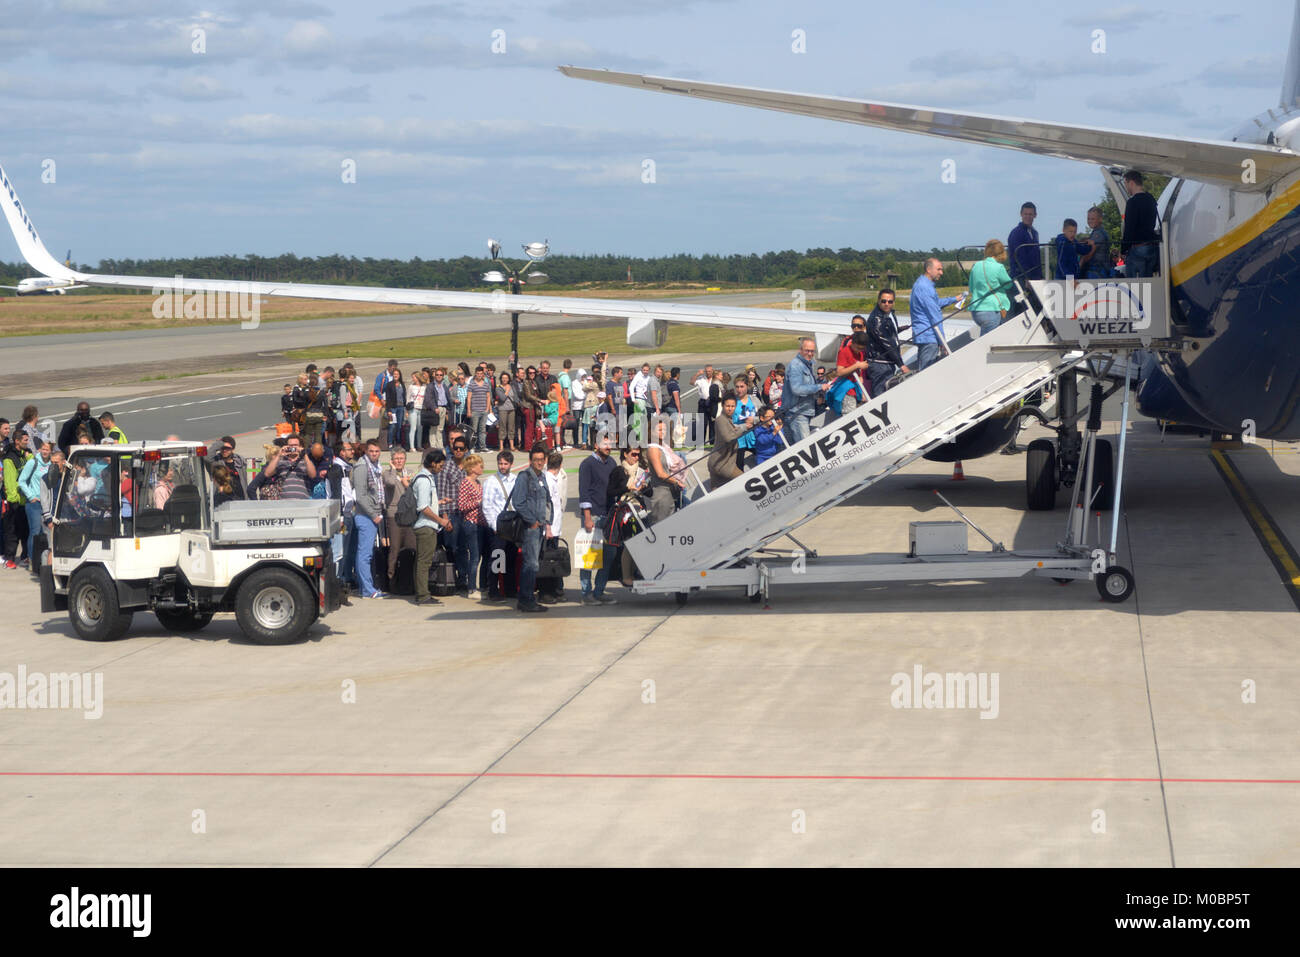 Weeze, Germany - June 29, 2013: People waiting in queue during the boarding to the Ryanair plane in Weeze airport, Germany on June 29, 2013. Ryanair w Stock Photo